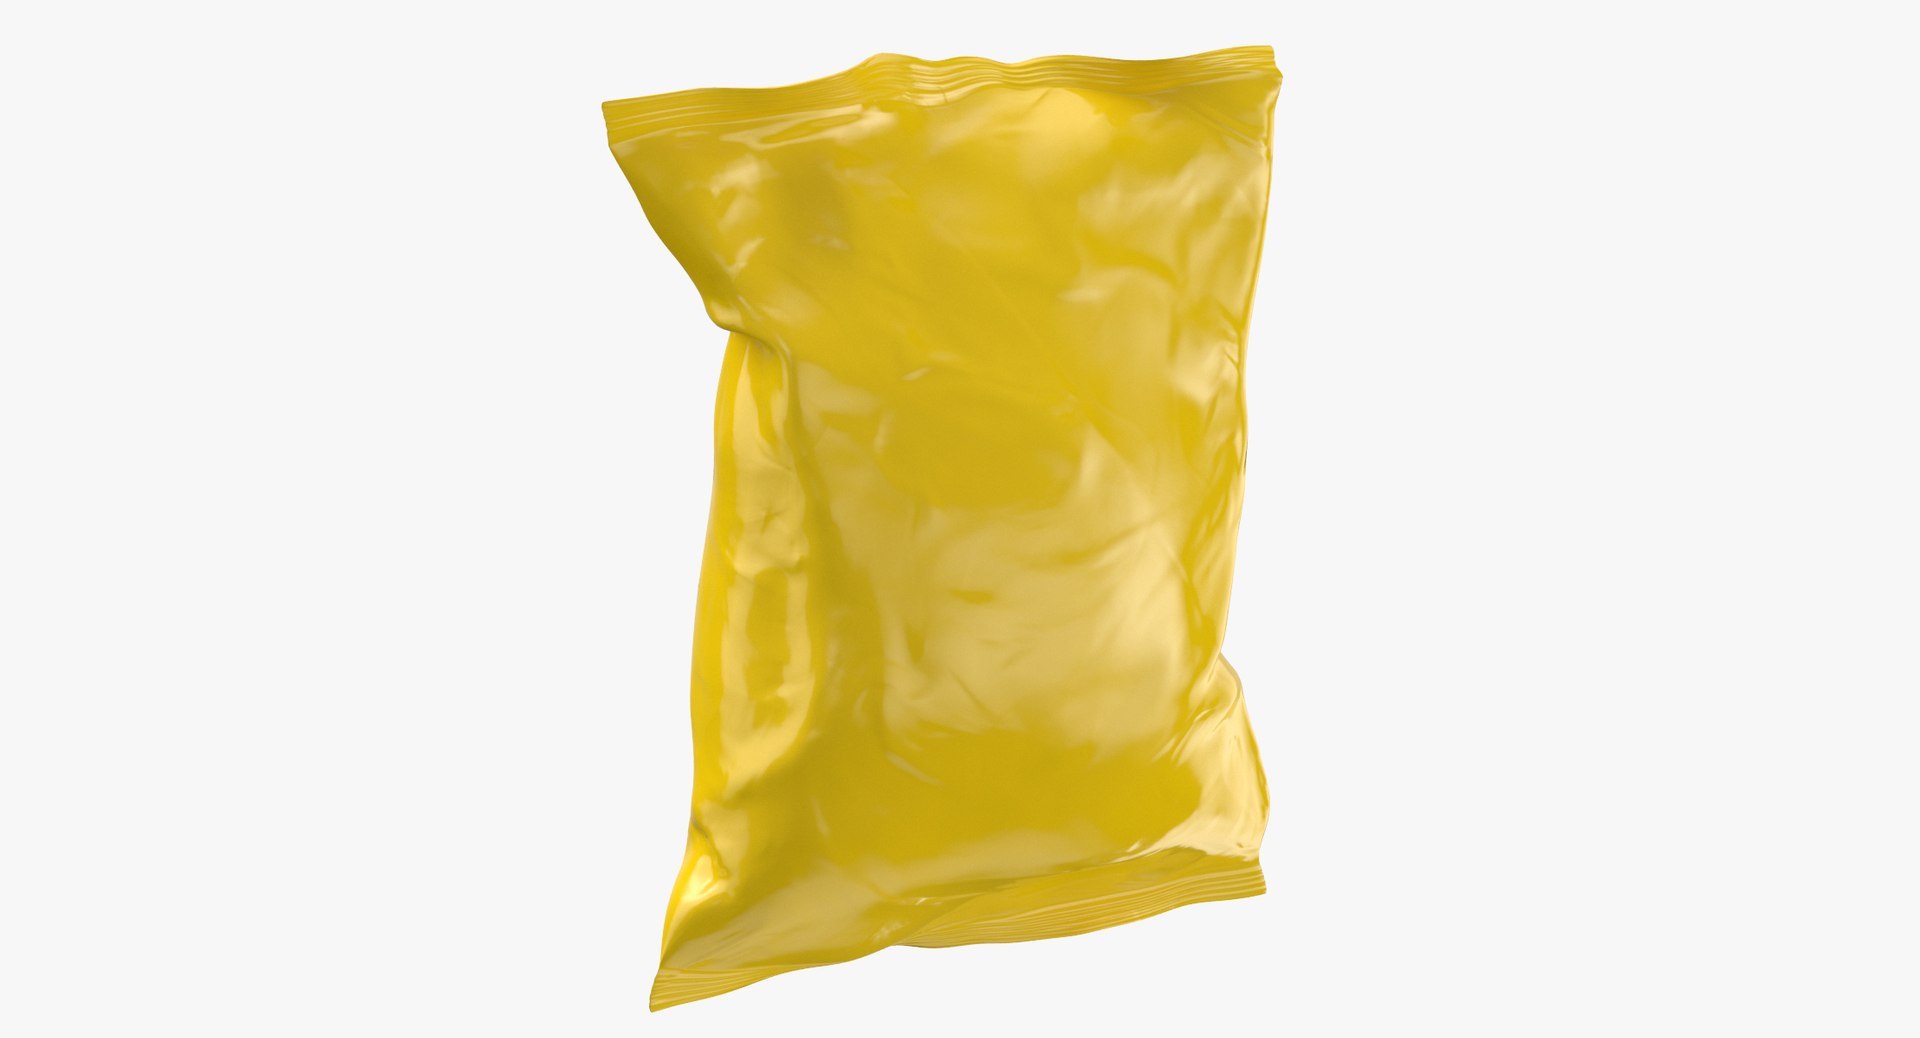 Balenciaga is reportedly selling a Lays potato chip bag for $1800 –  Emirates Woman